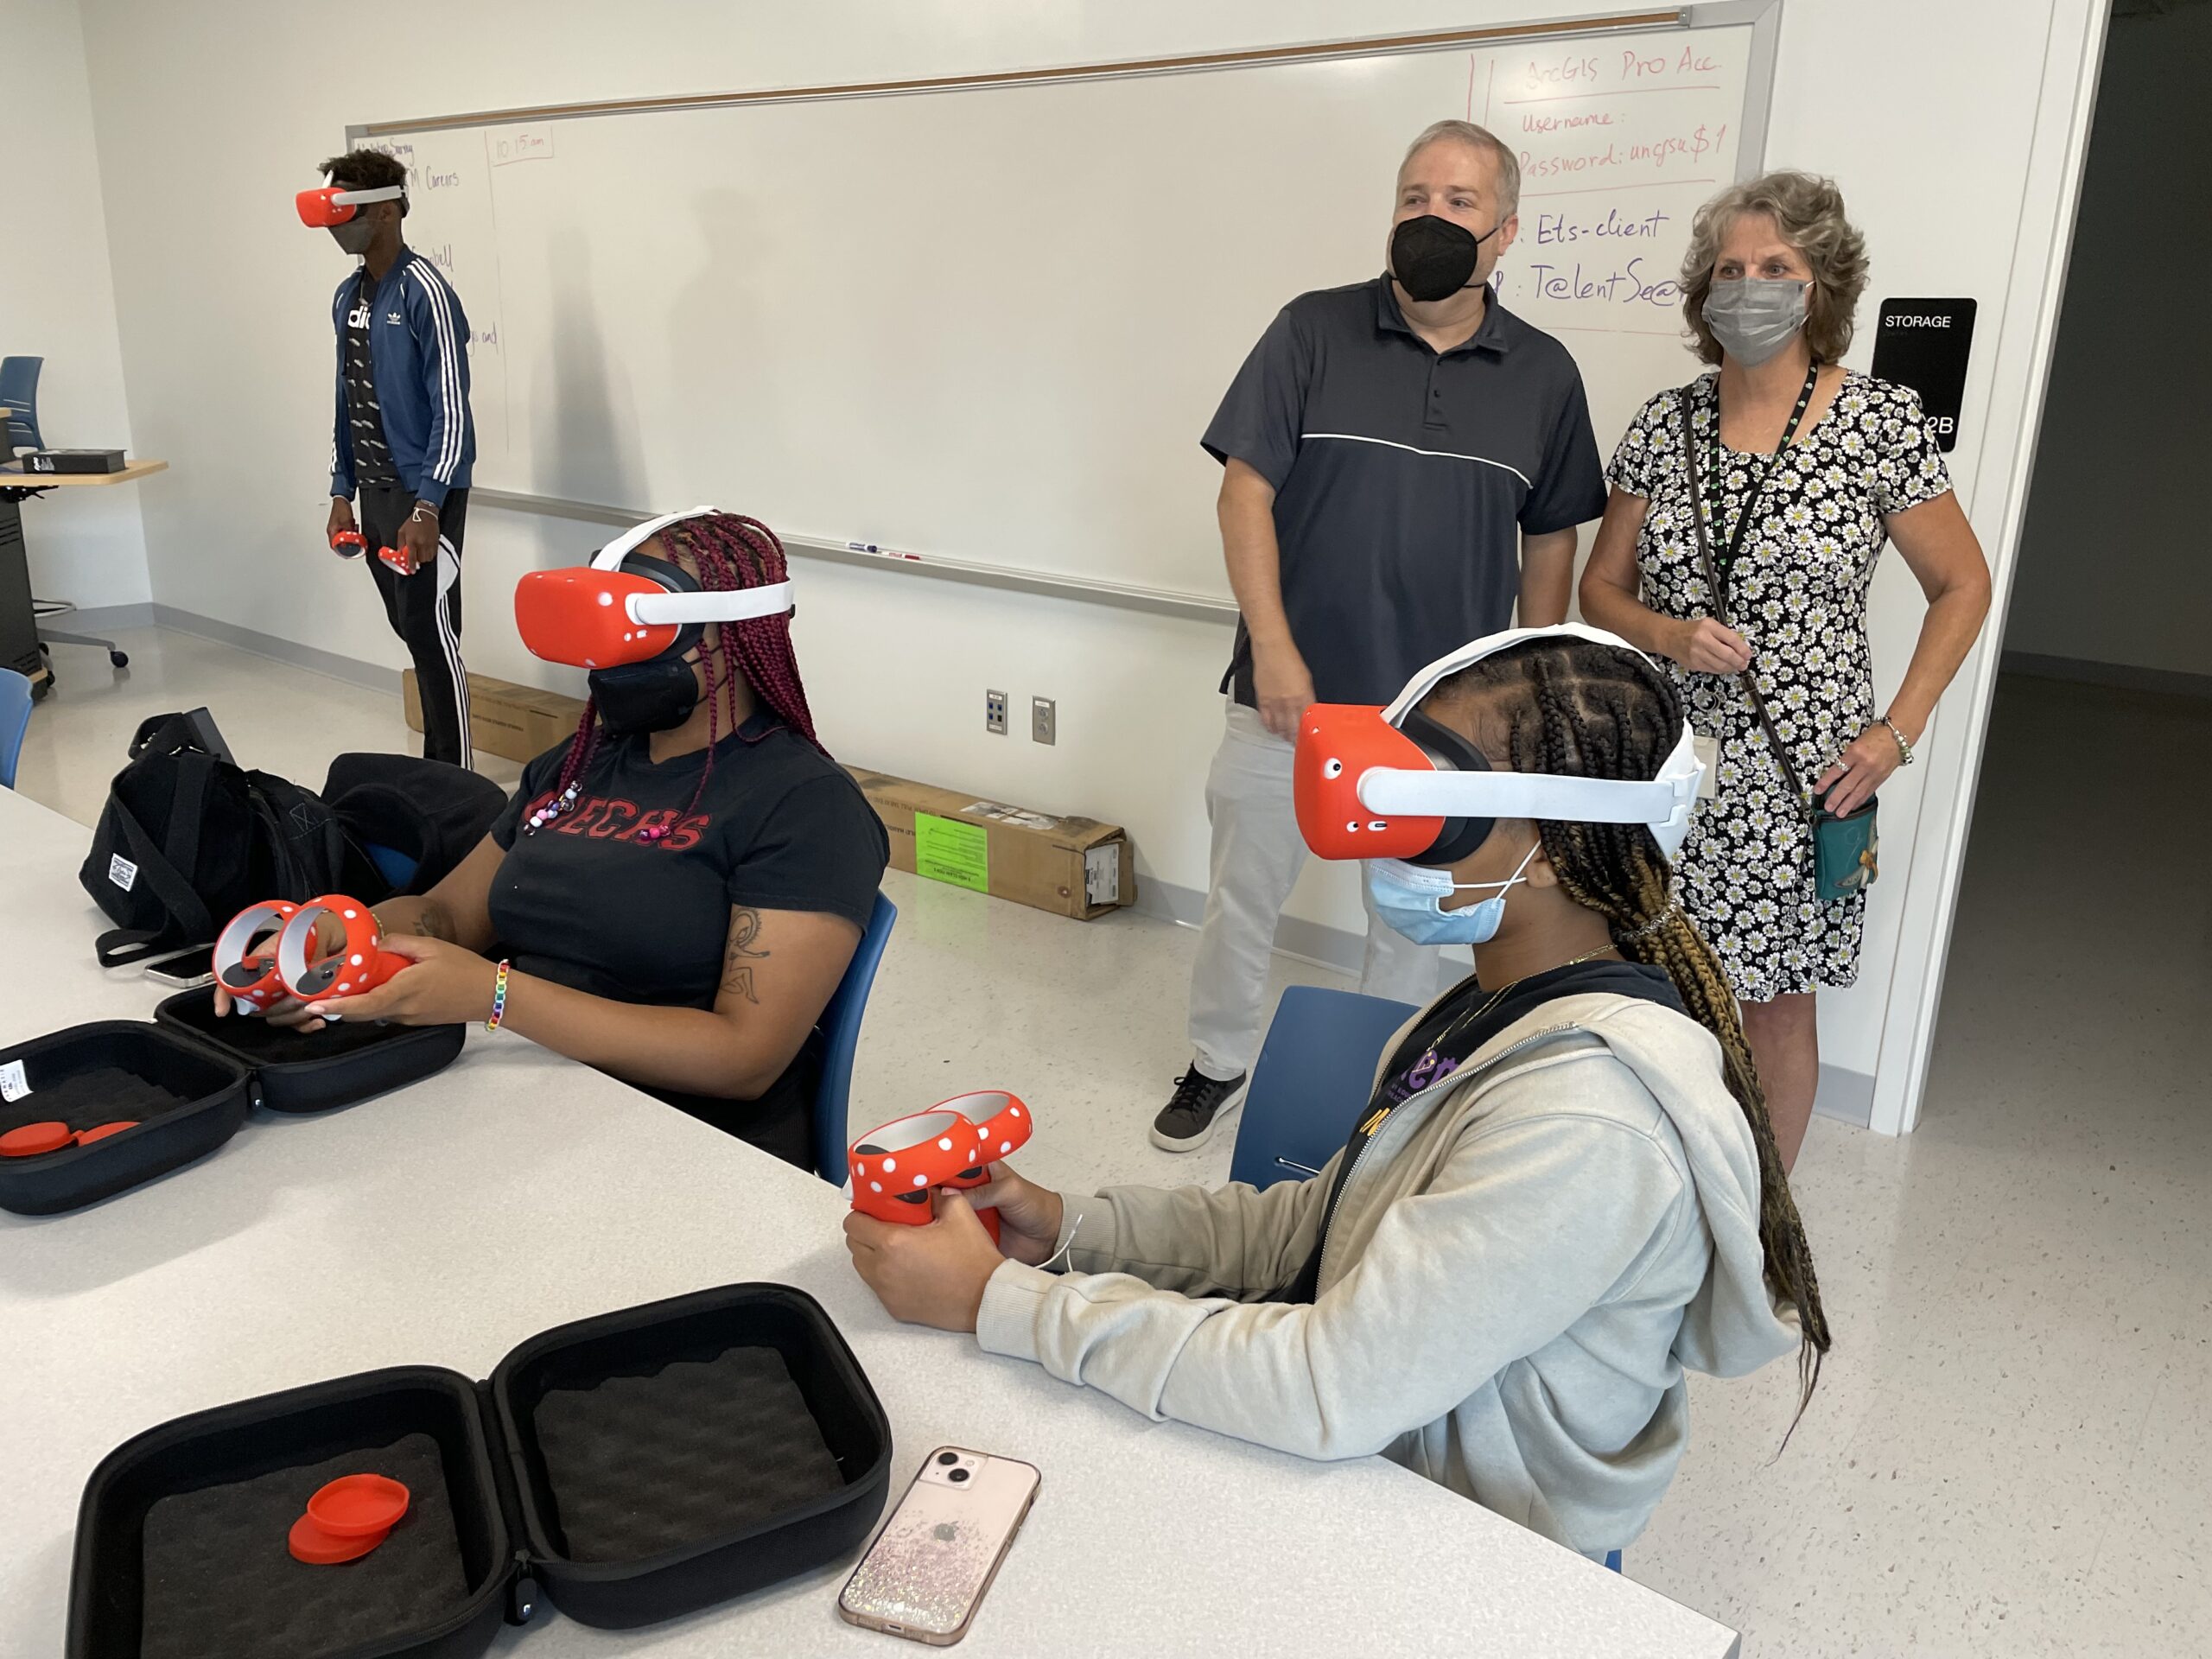 Two students are wearing VR headsets and holding the controllers. Two adults stand in the background supervising them.